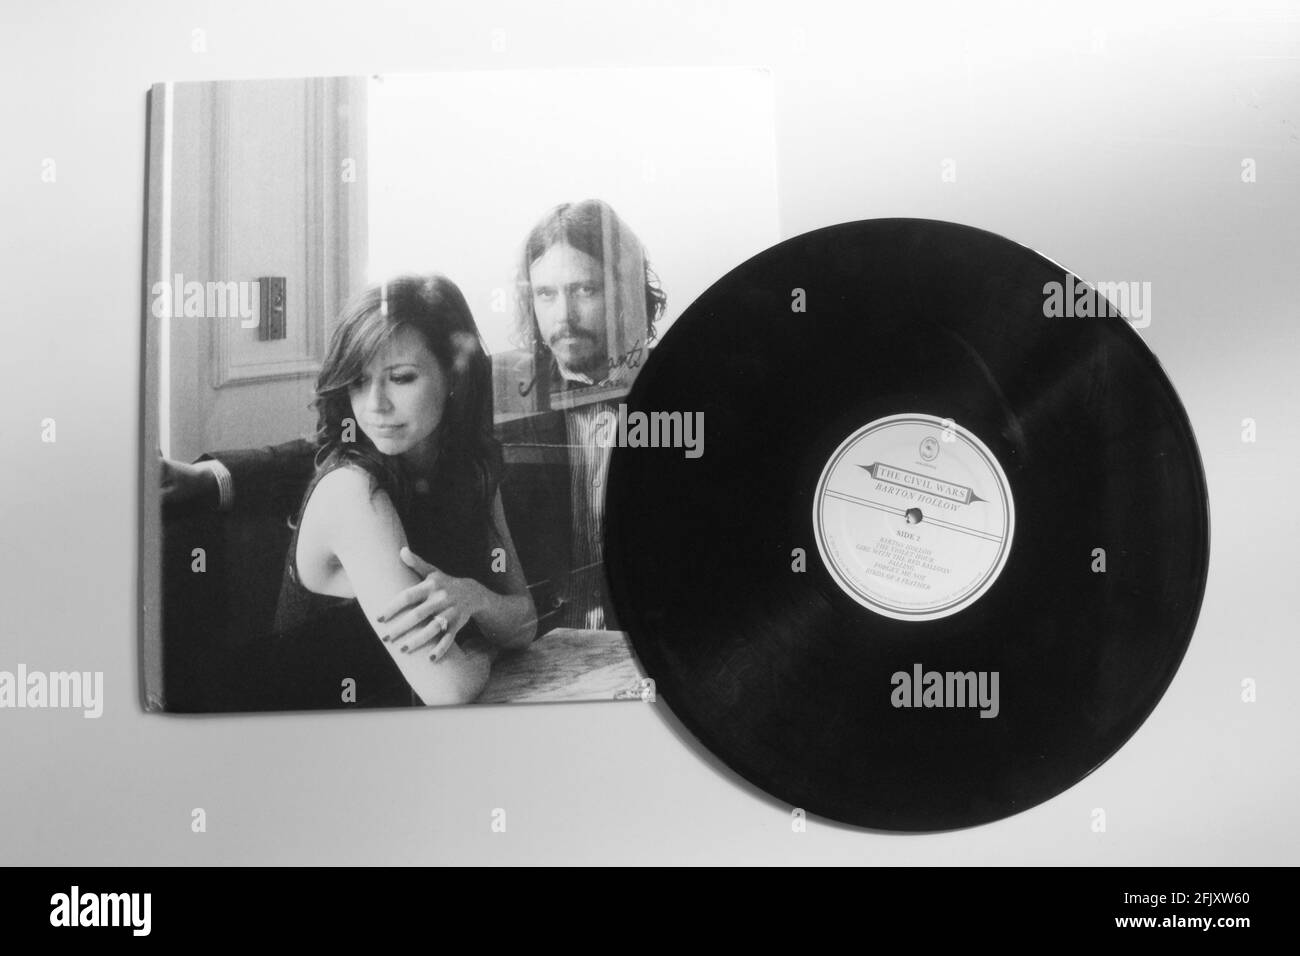 The Civil Wars music album on vinyl record LP disc. The record is called Baton Hallow. They were known to play Indie folk music. Stock Photo